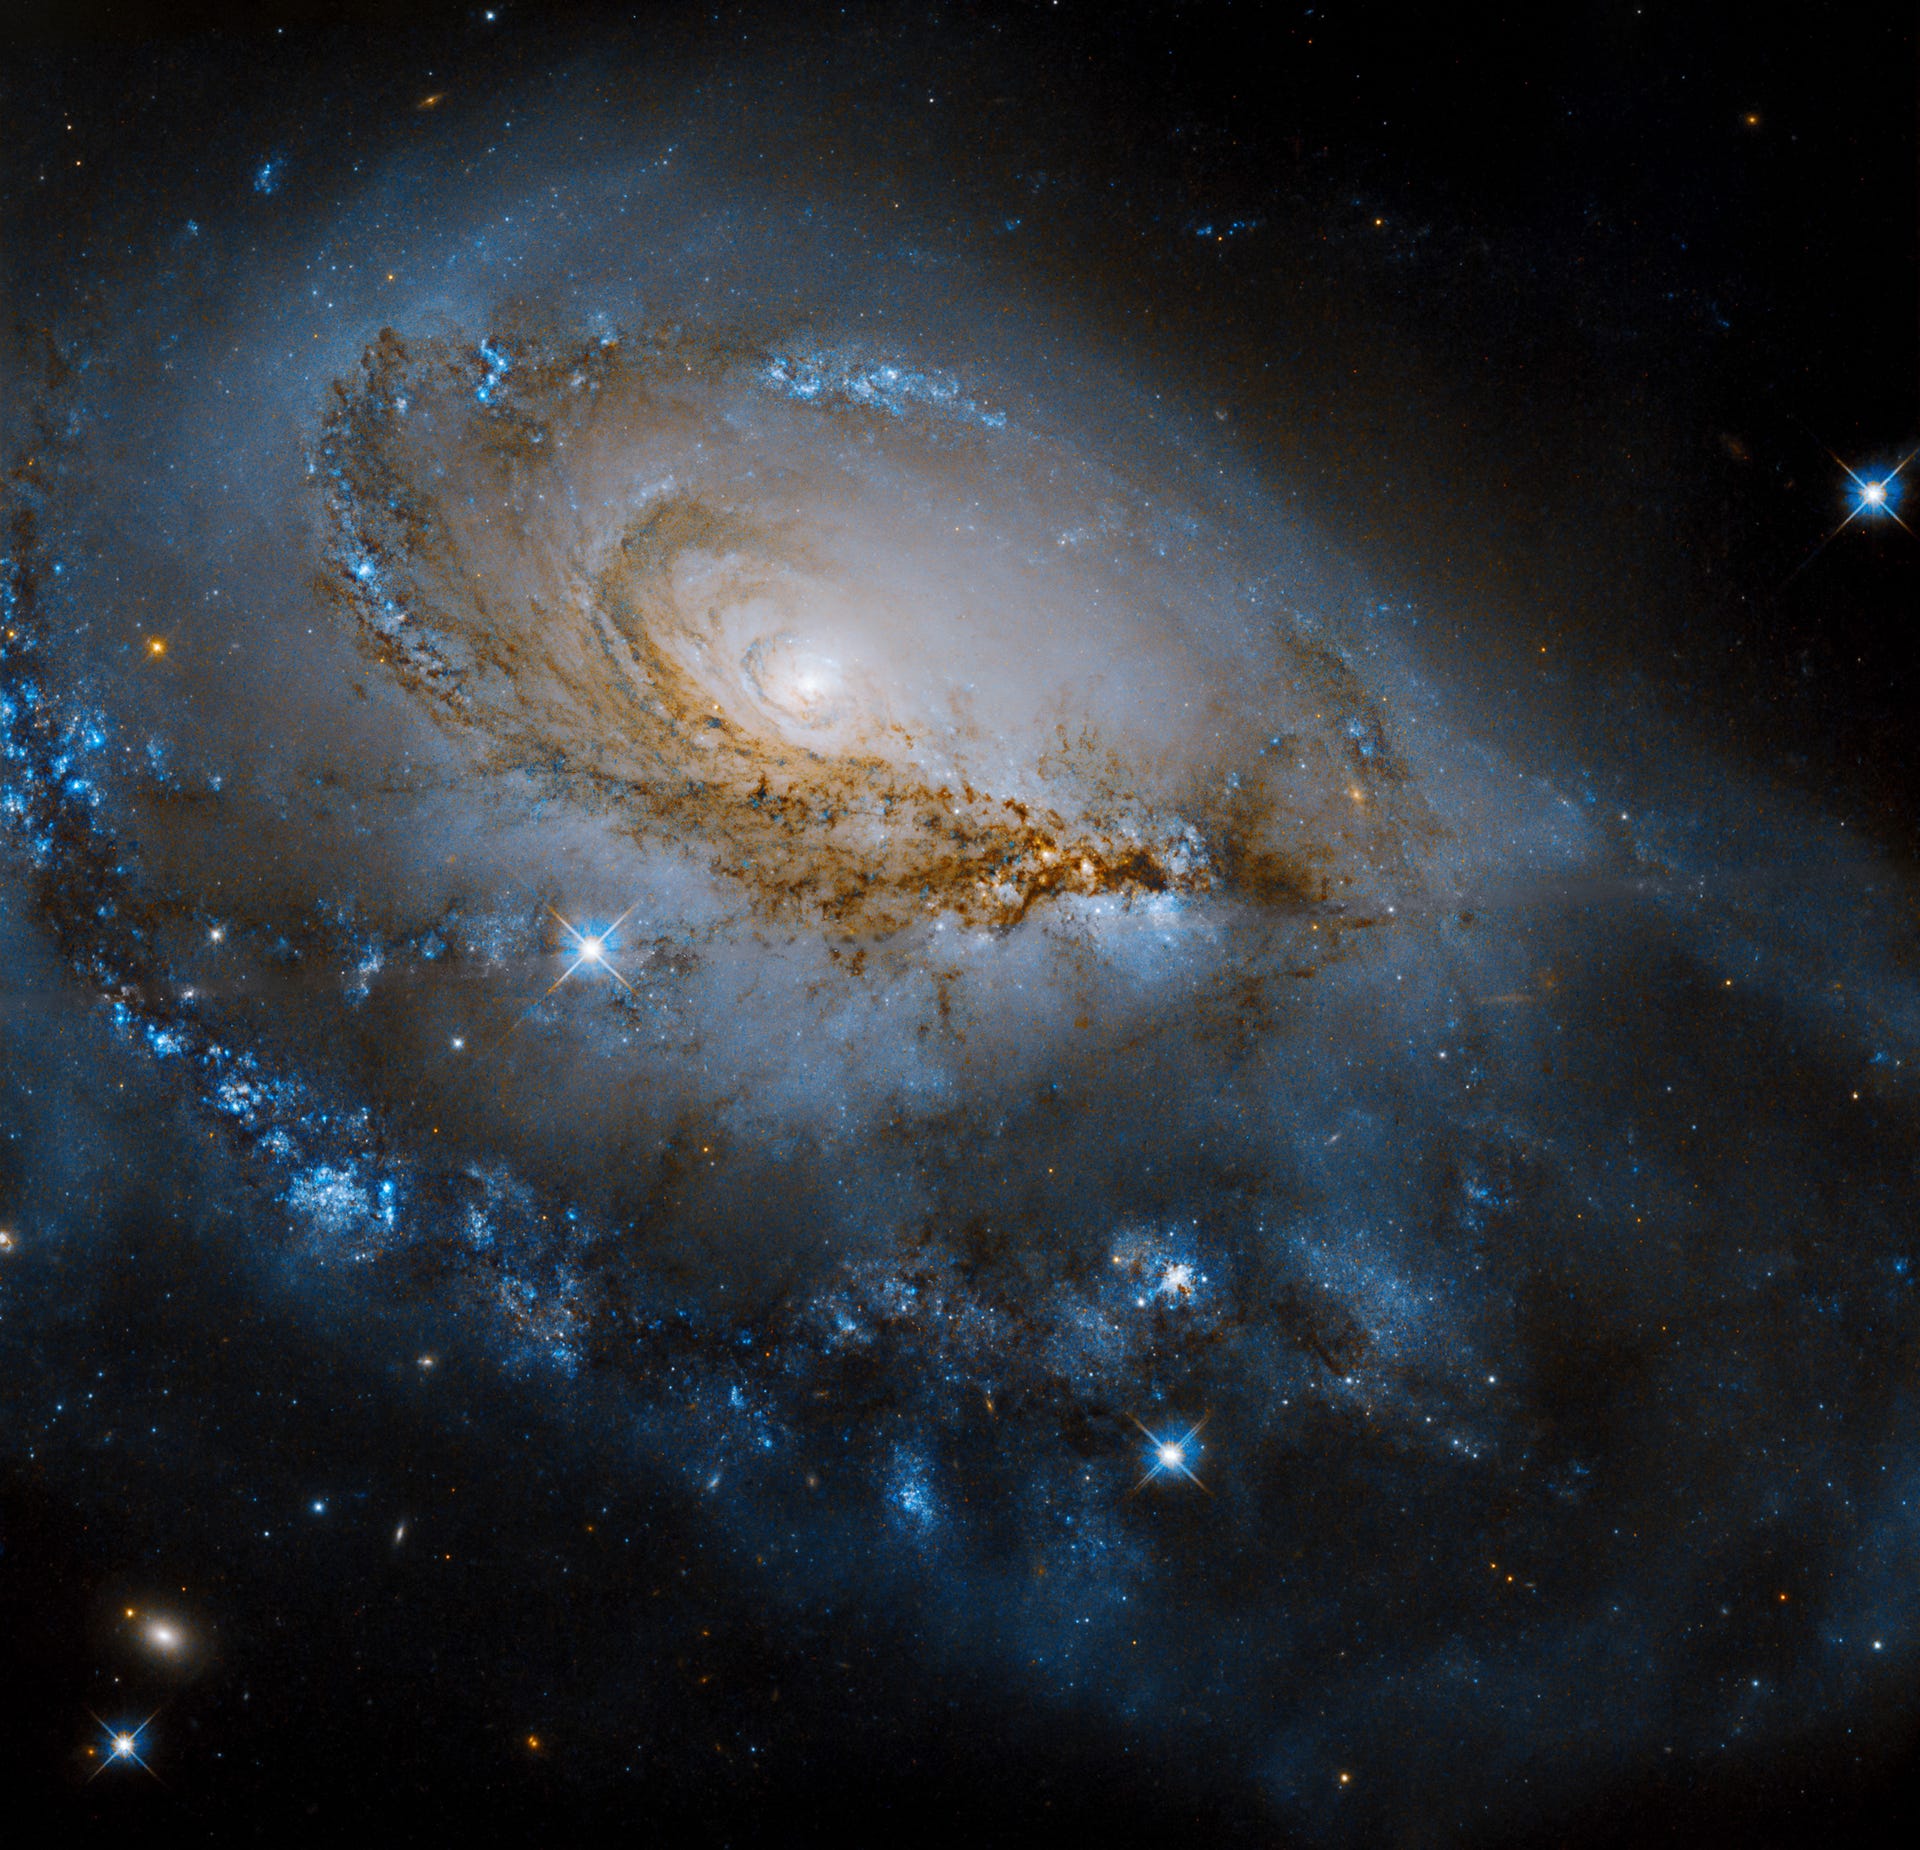 A glowing spiral galaxy seen as a slight angle with swirling blues and browns against black space.